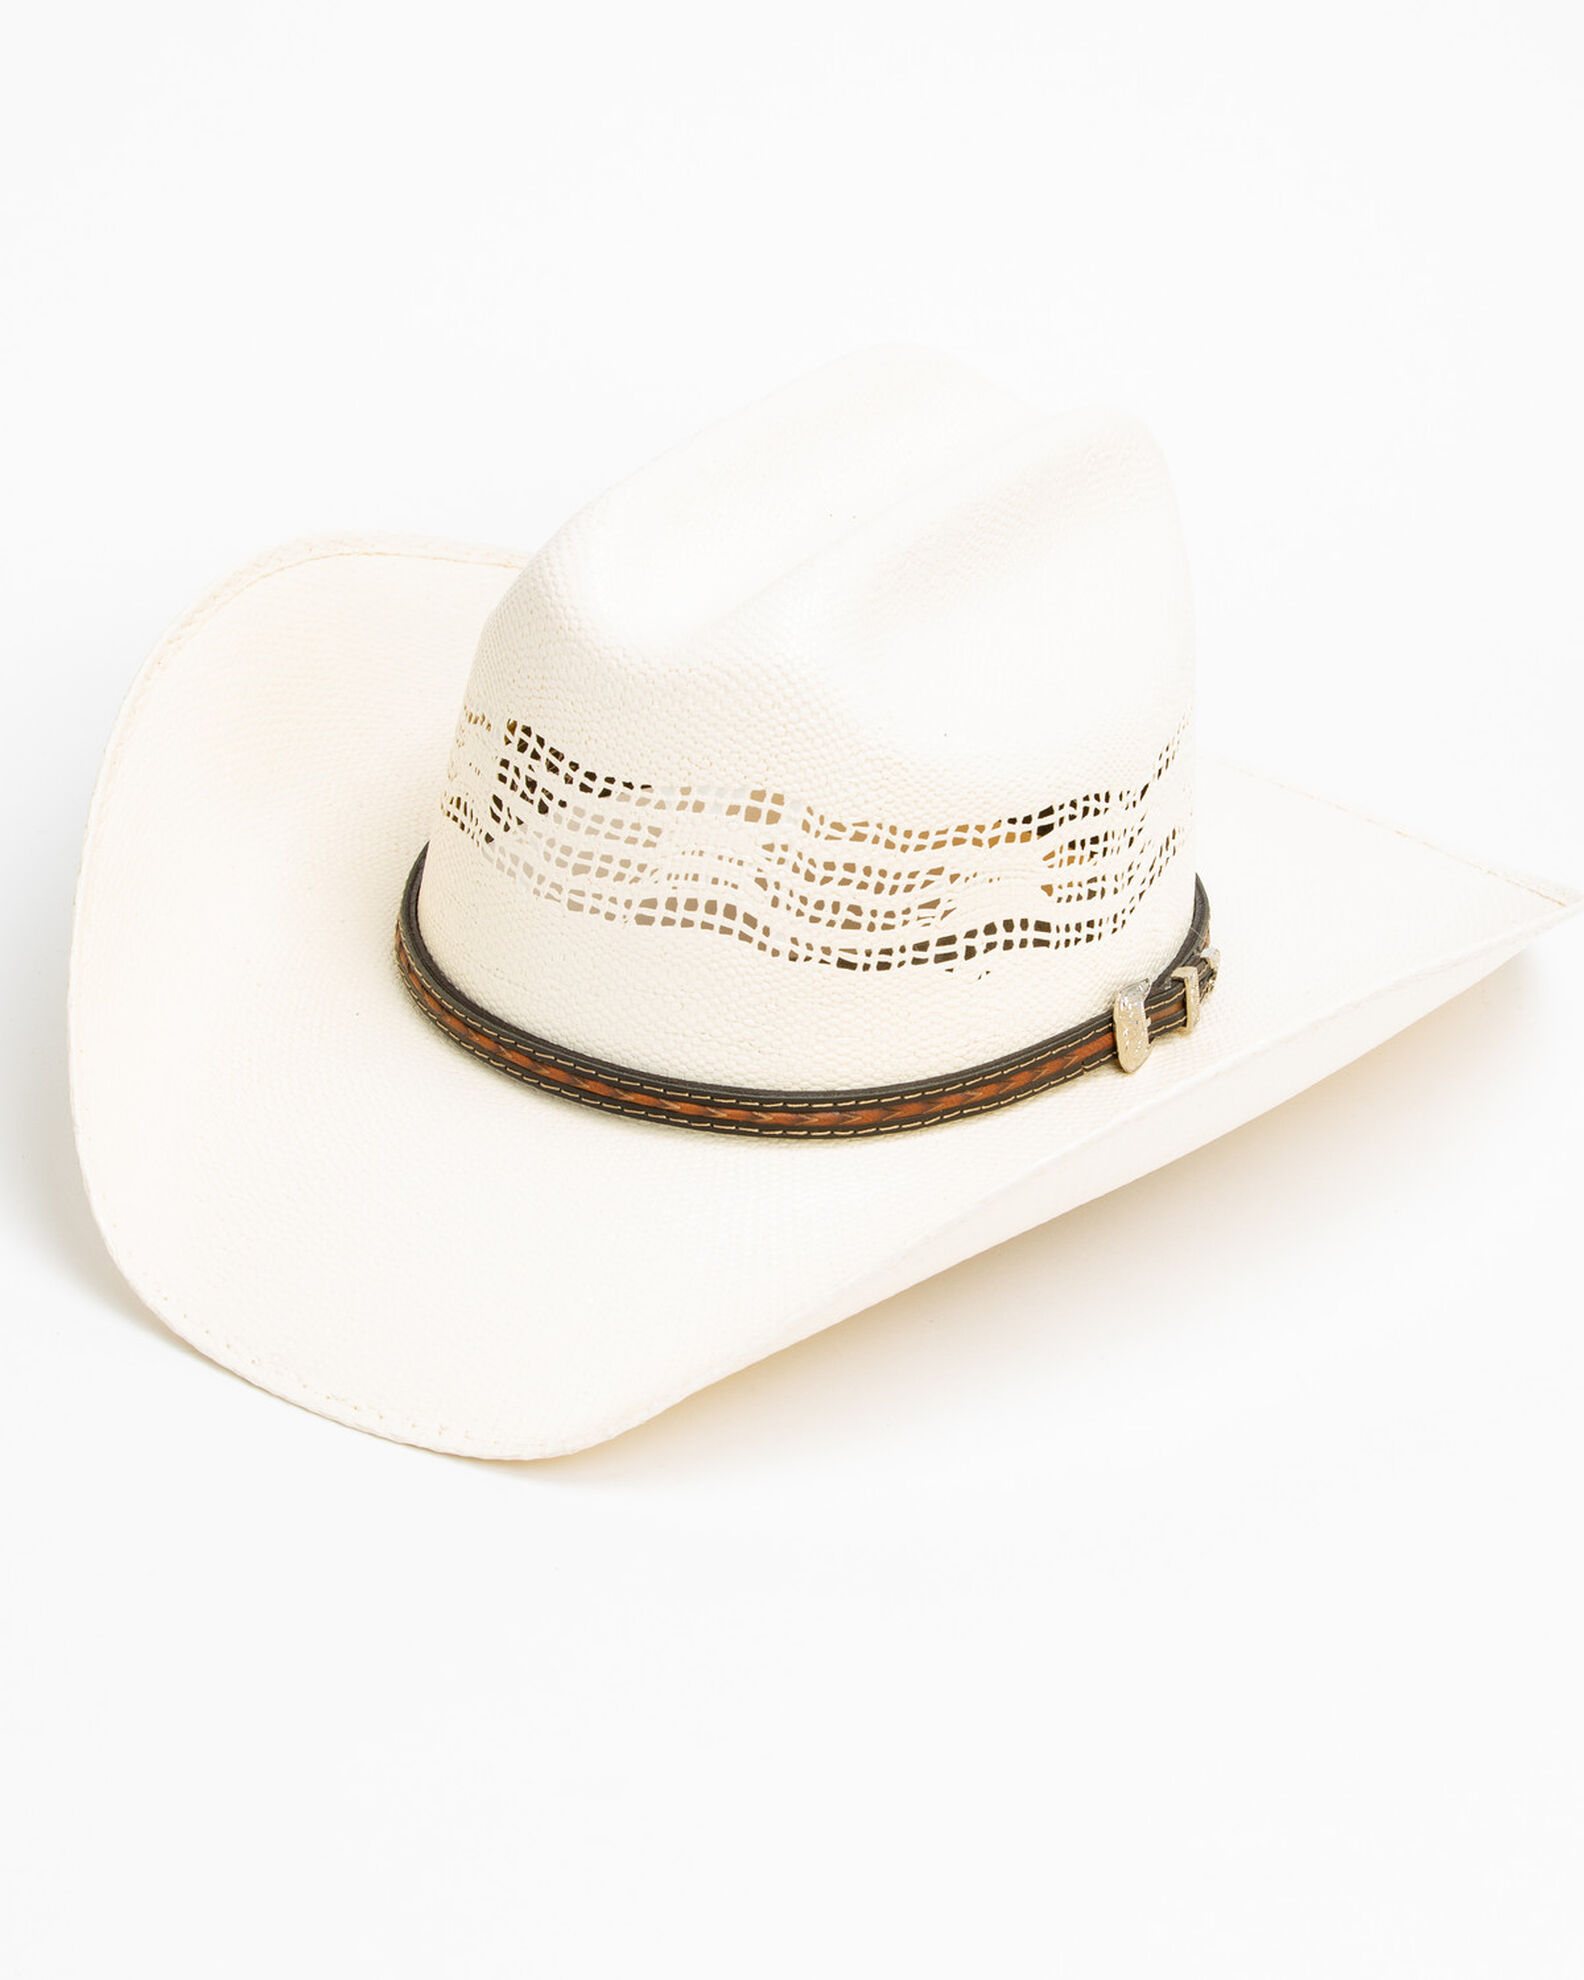 Product Name: Cody James Pro Rodeo 20X Straw Cowboy Hat